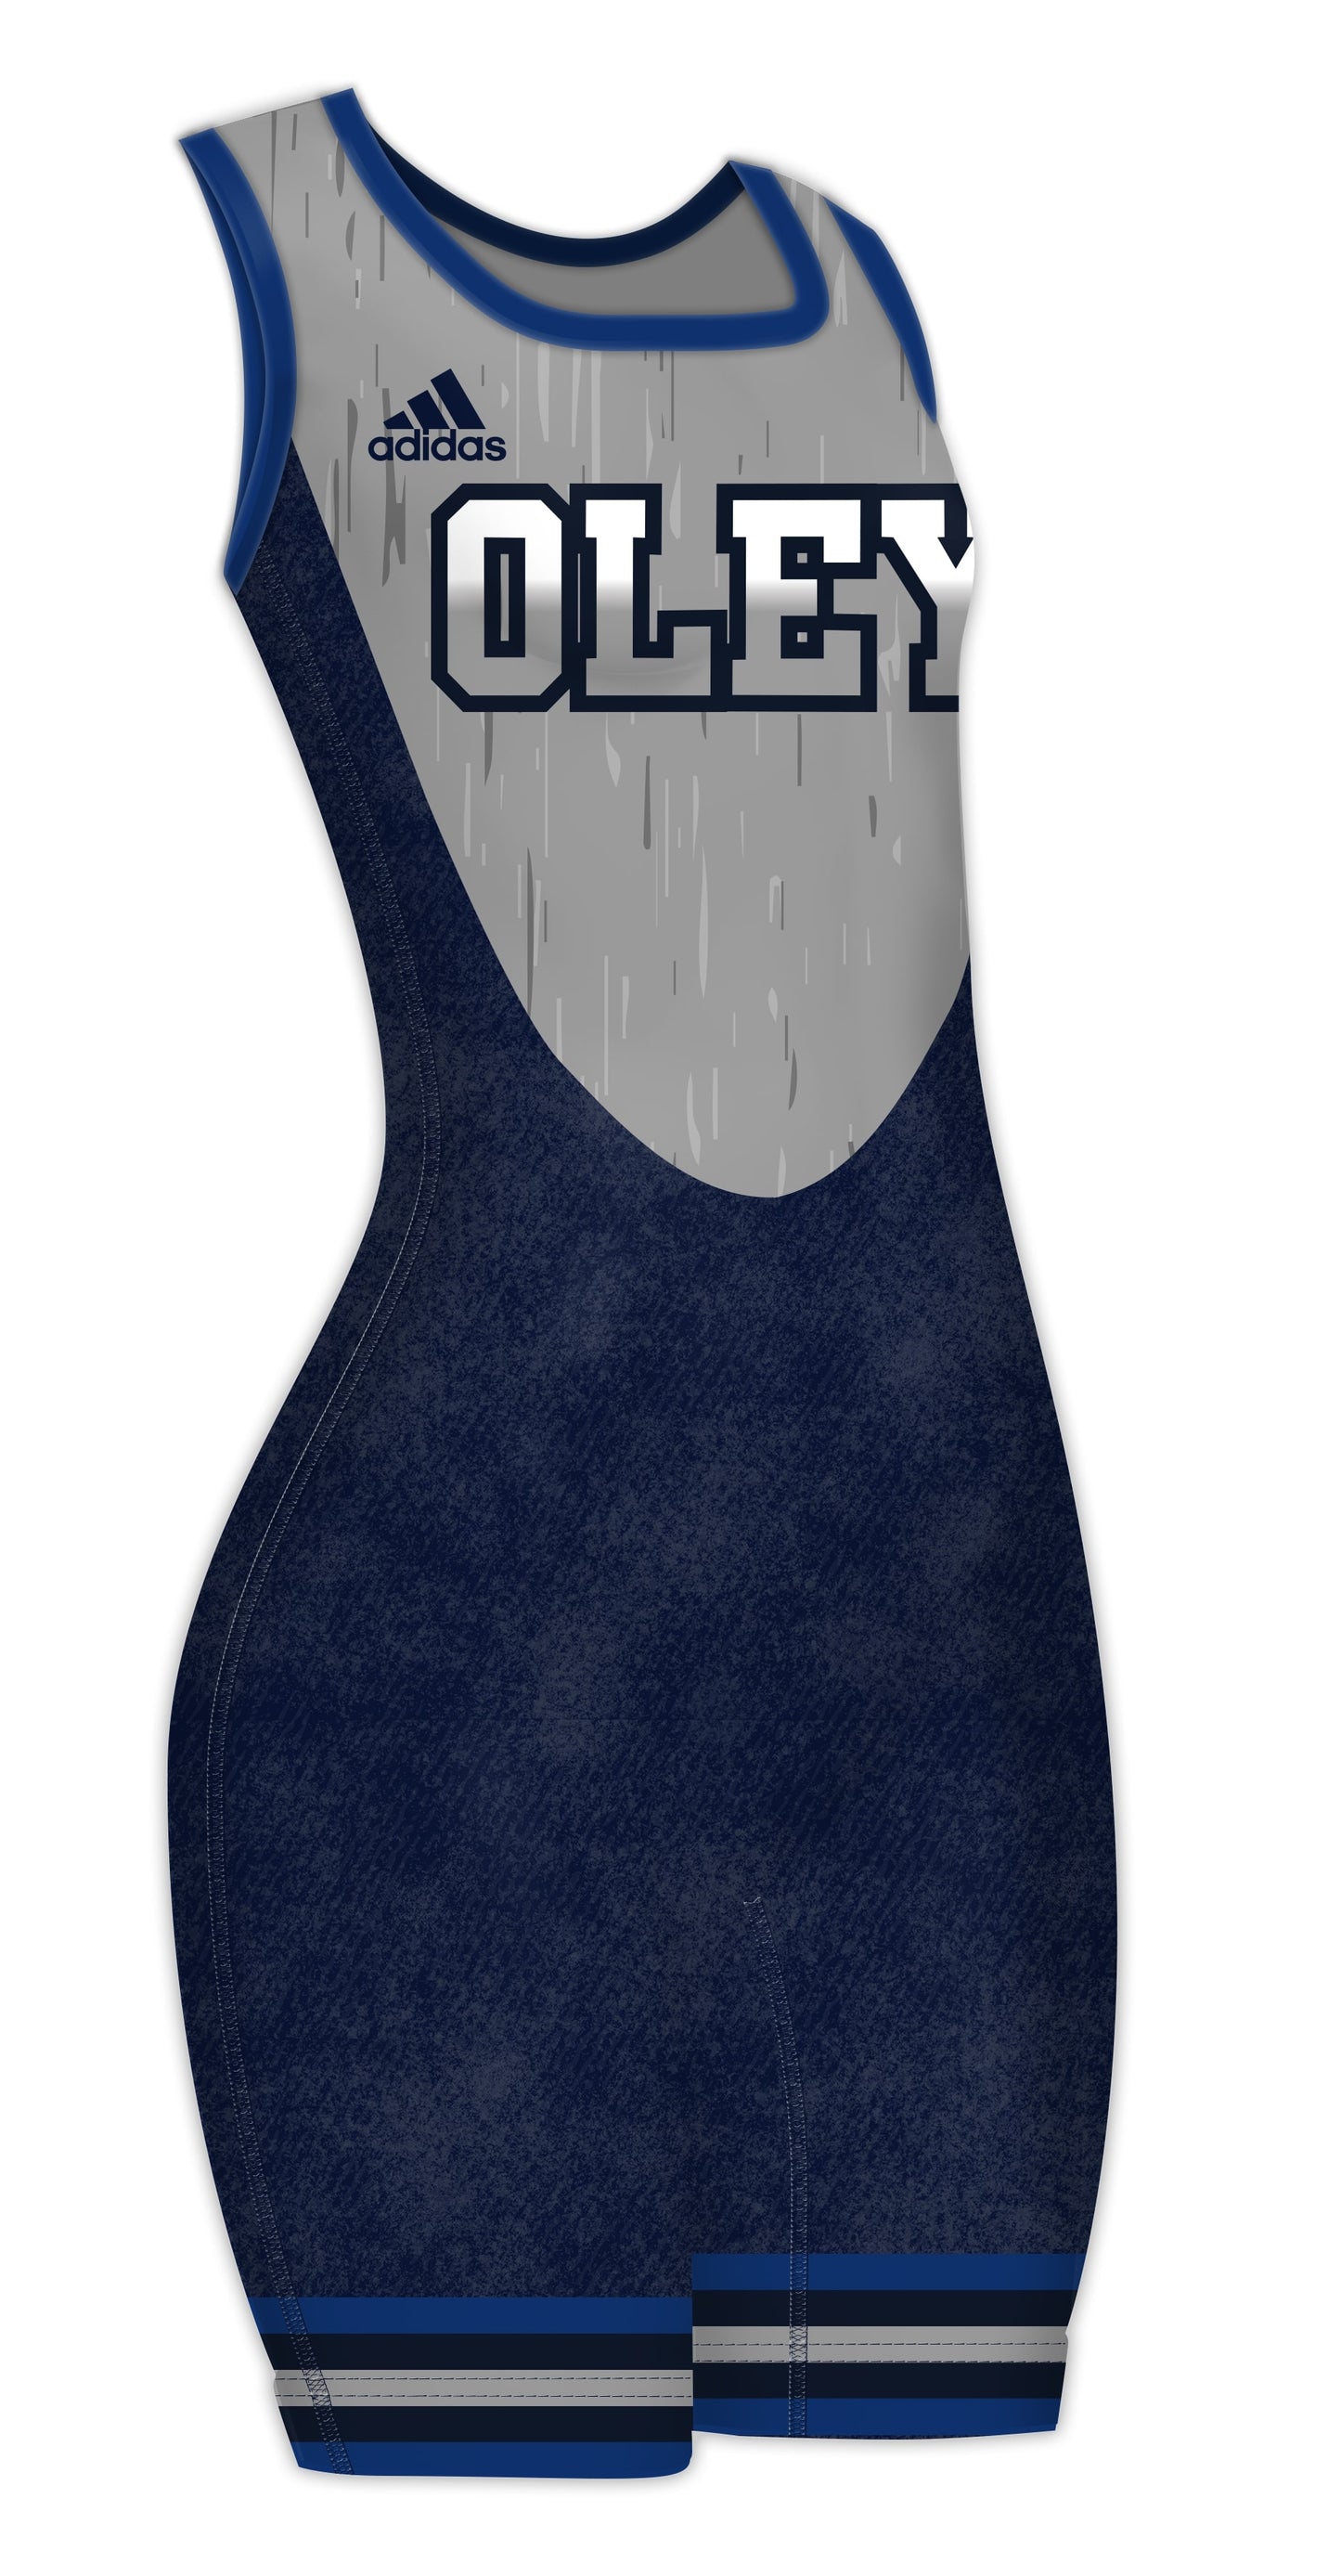 Adidas Sublimated Singlet (AS108c-01-51)